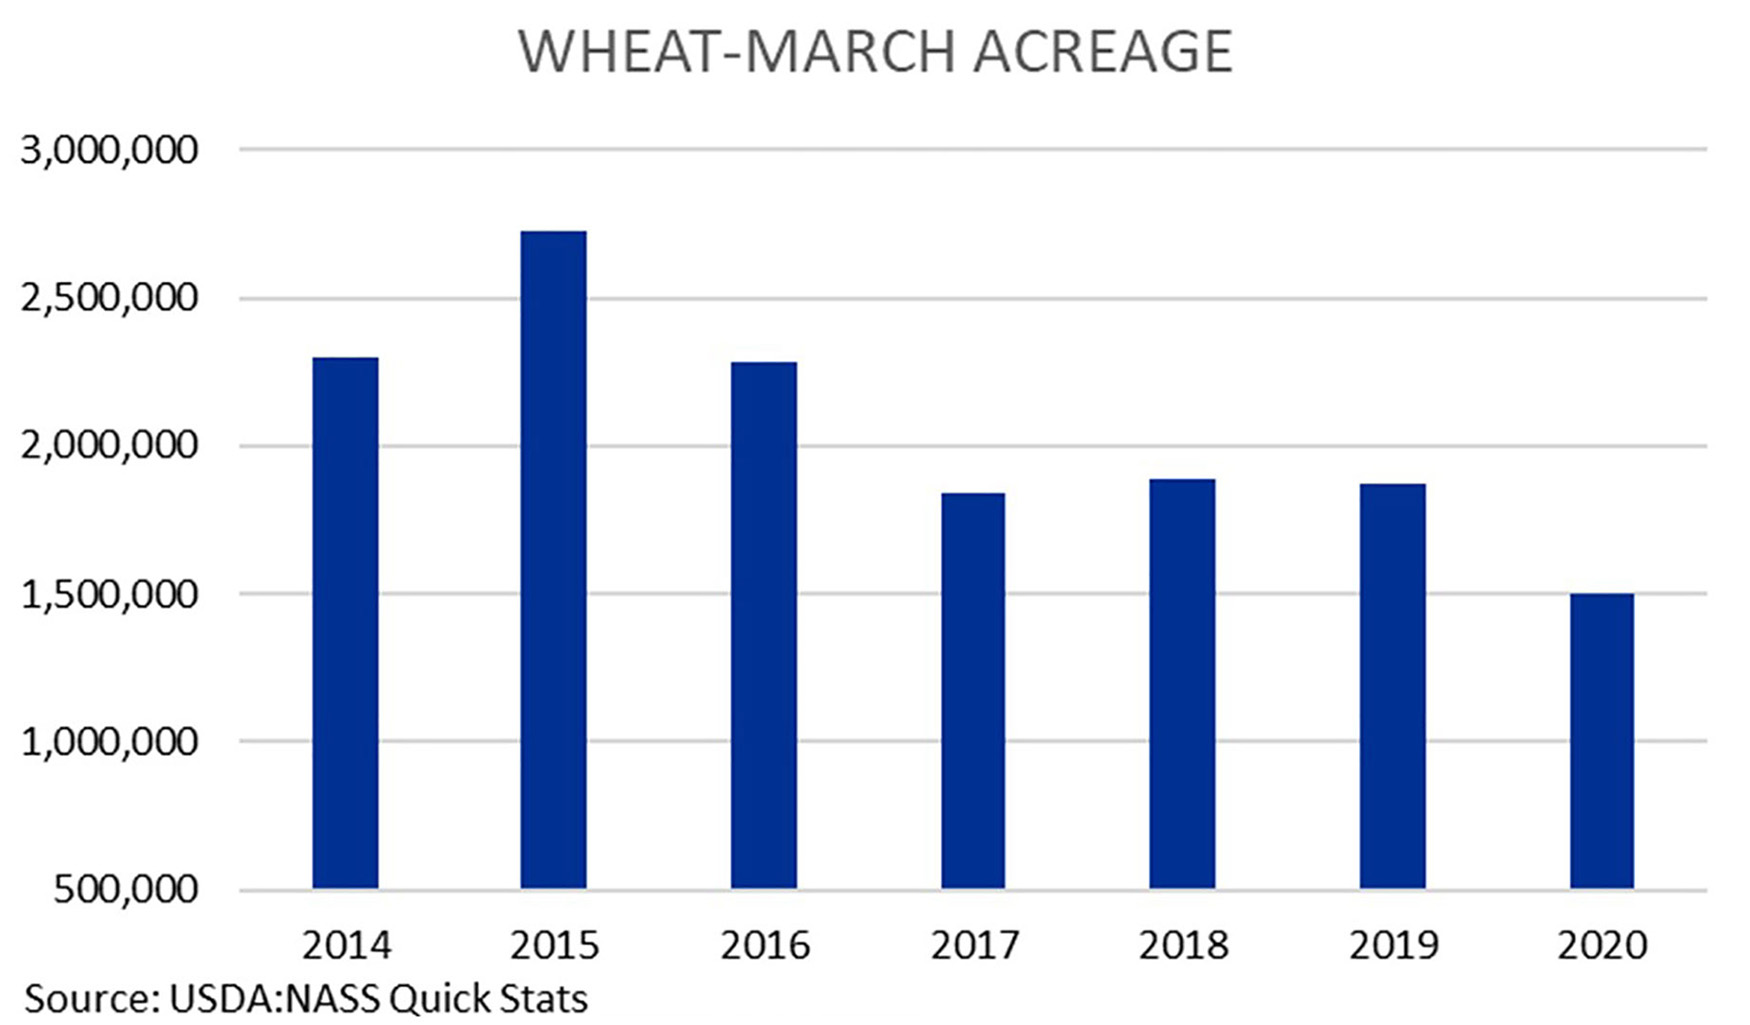 A bar graph displaying wheat planting intentions from 2015 ti 2020. 2019 shows nearly 2,000,000 acres. 2020 shows 1,500,000 acres. For a complete description, call SDSU Extension at 605-688-6729.